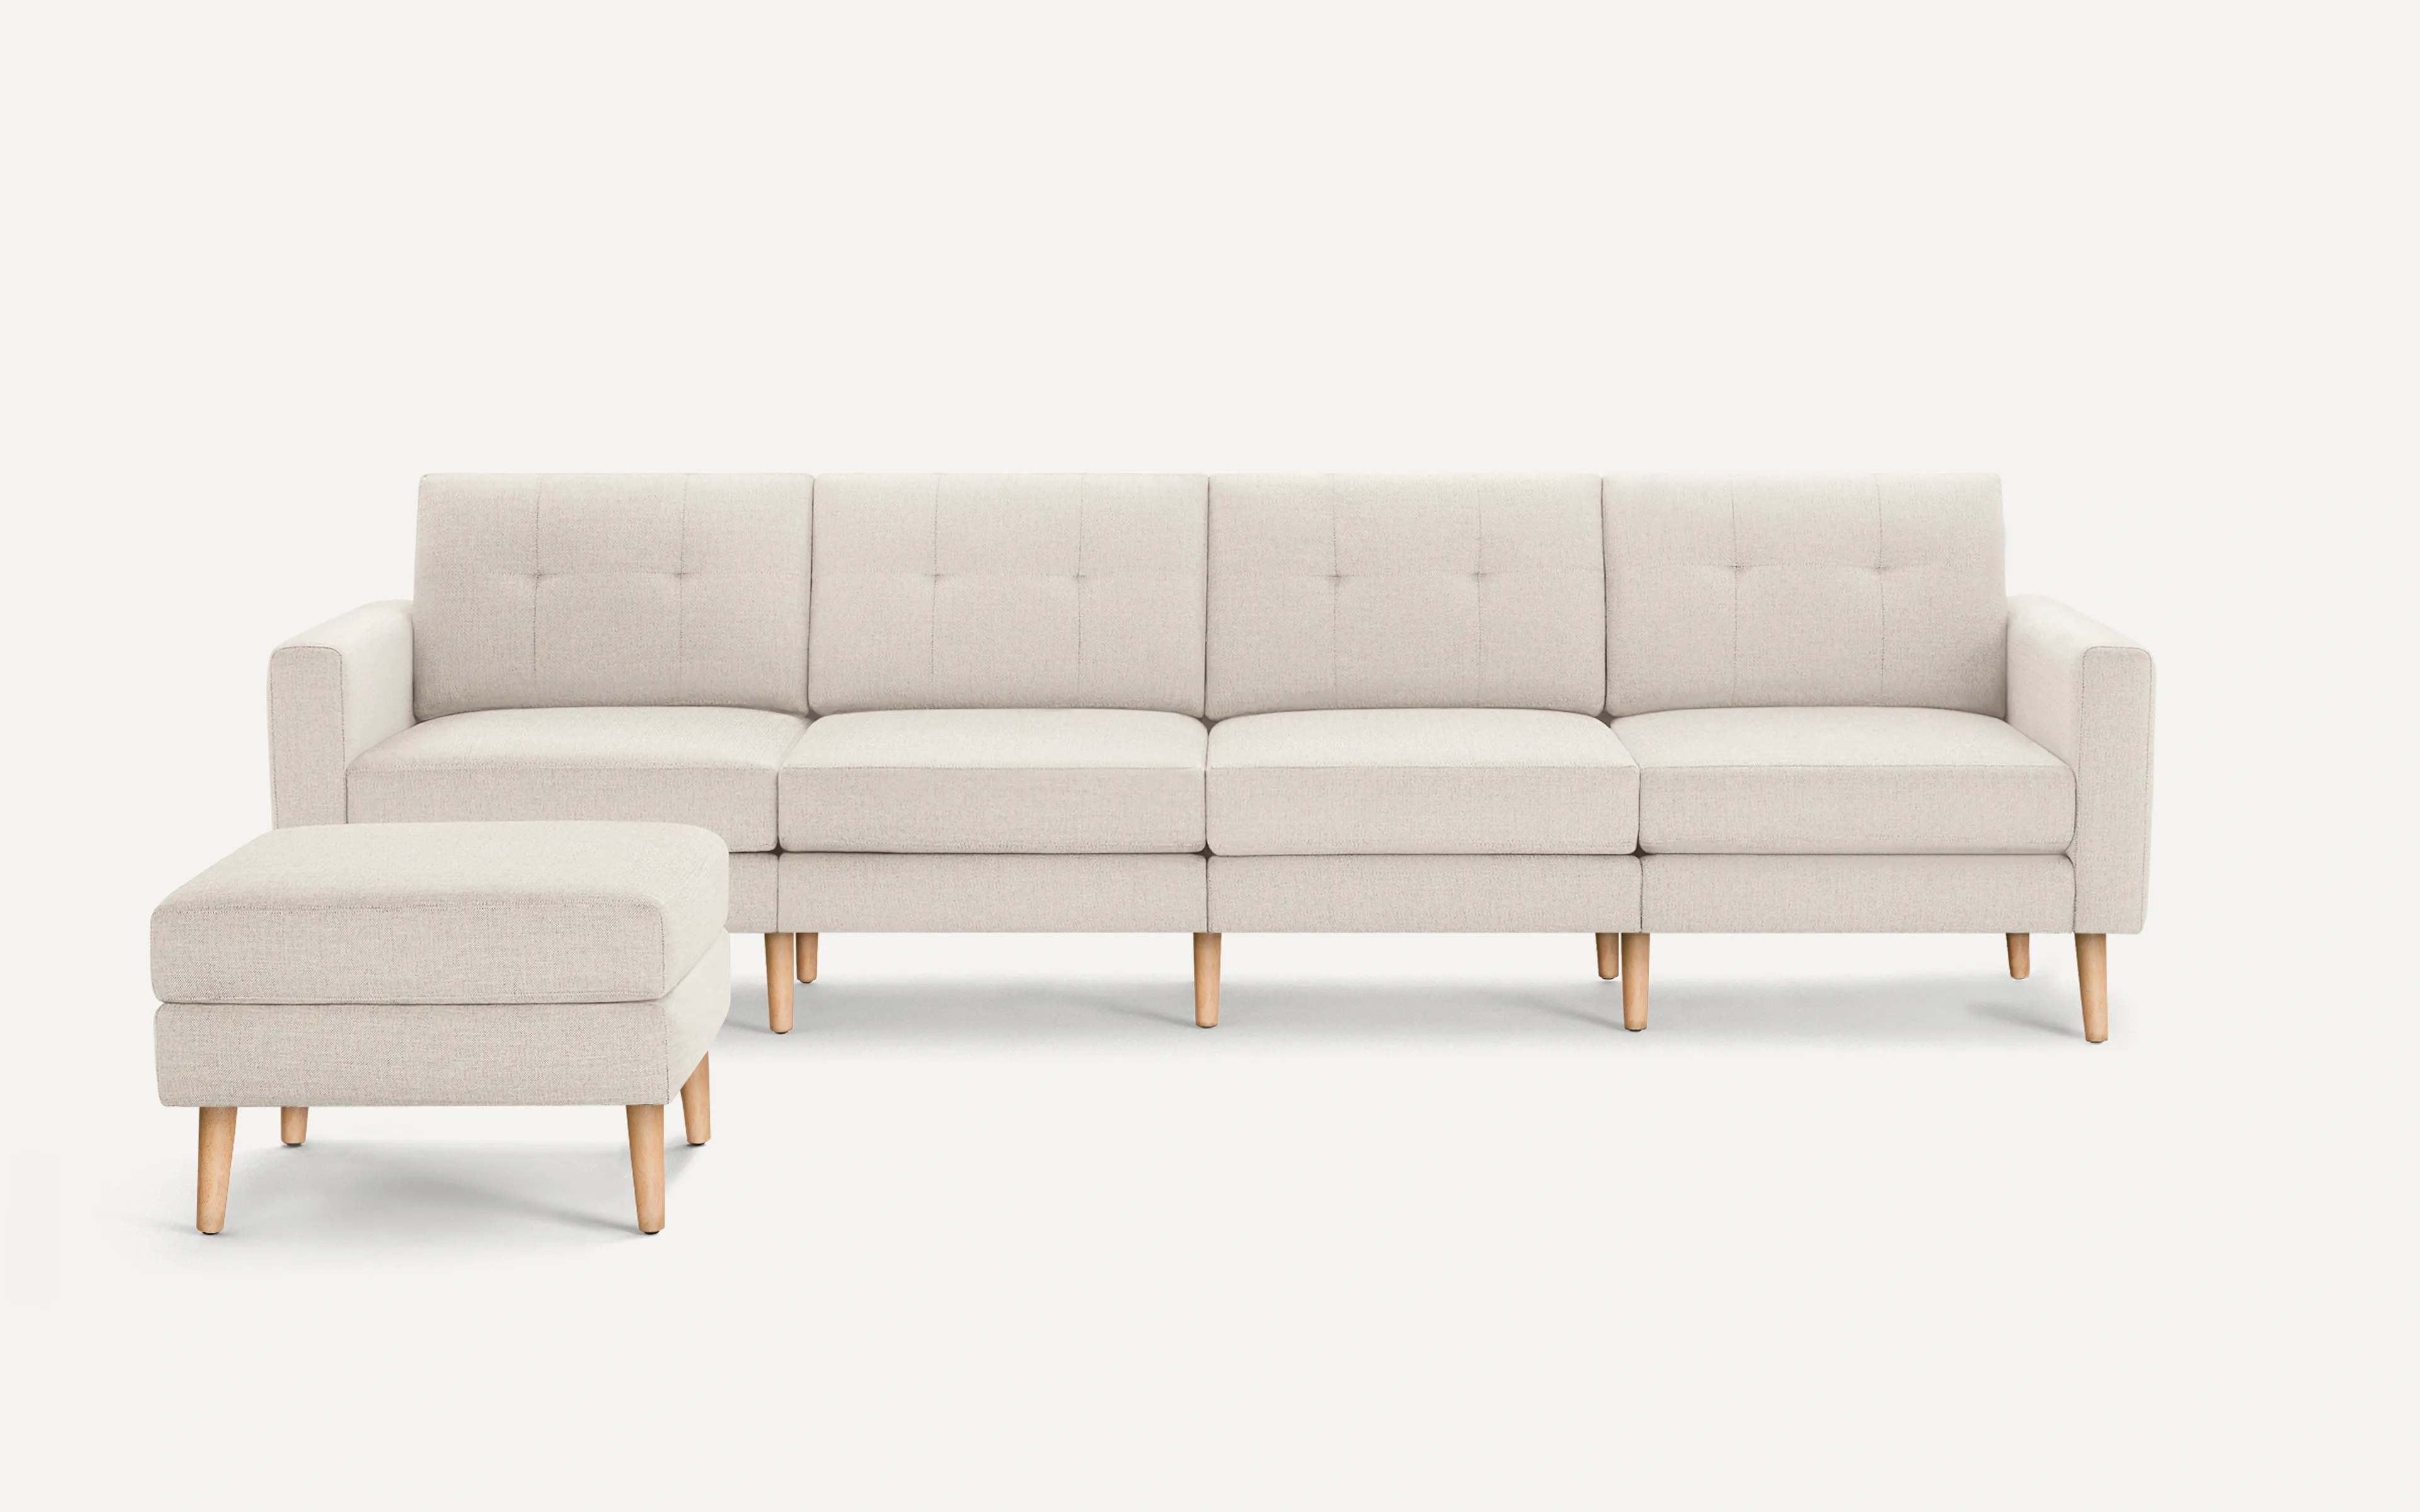 Original Nomad King Sofa with Ottoman in Ivory Fabric